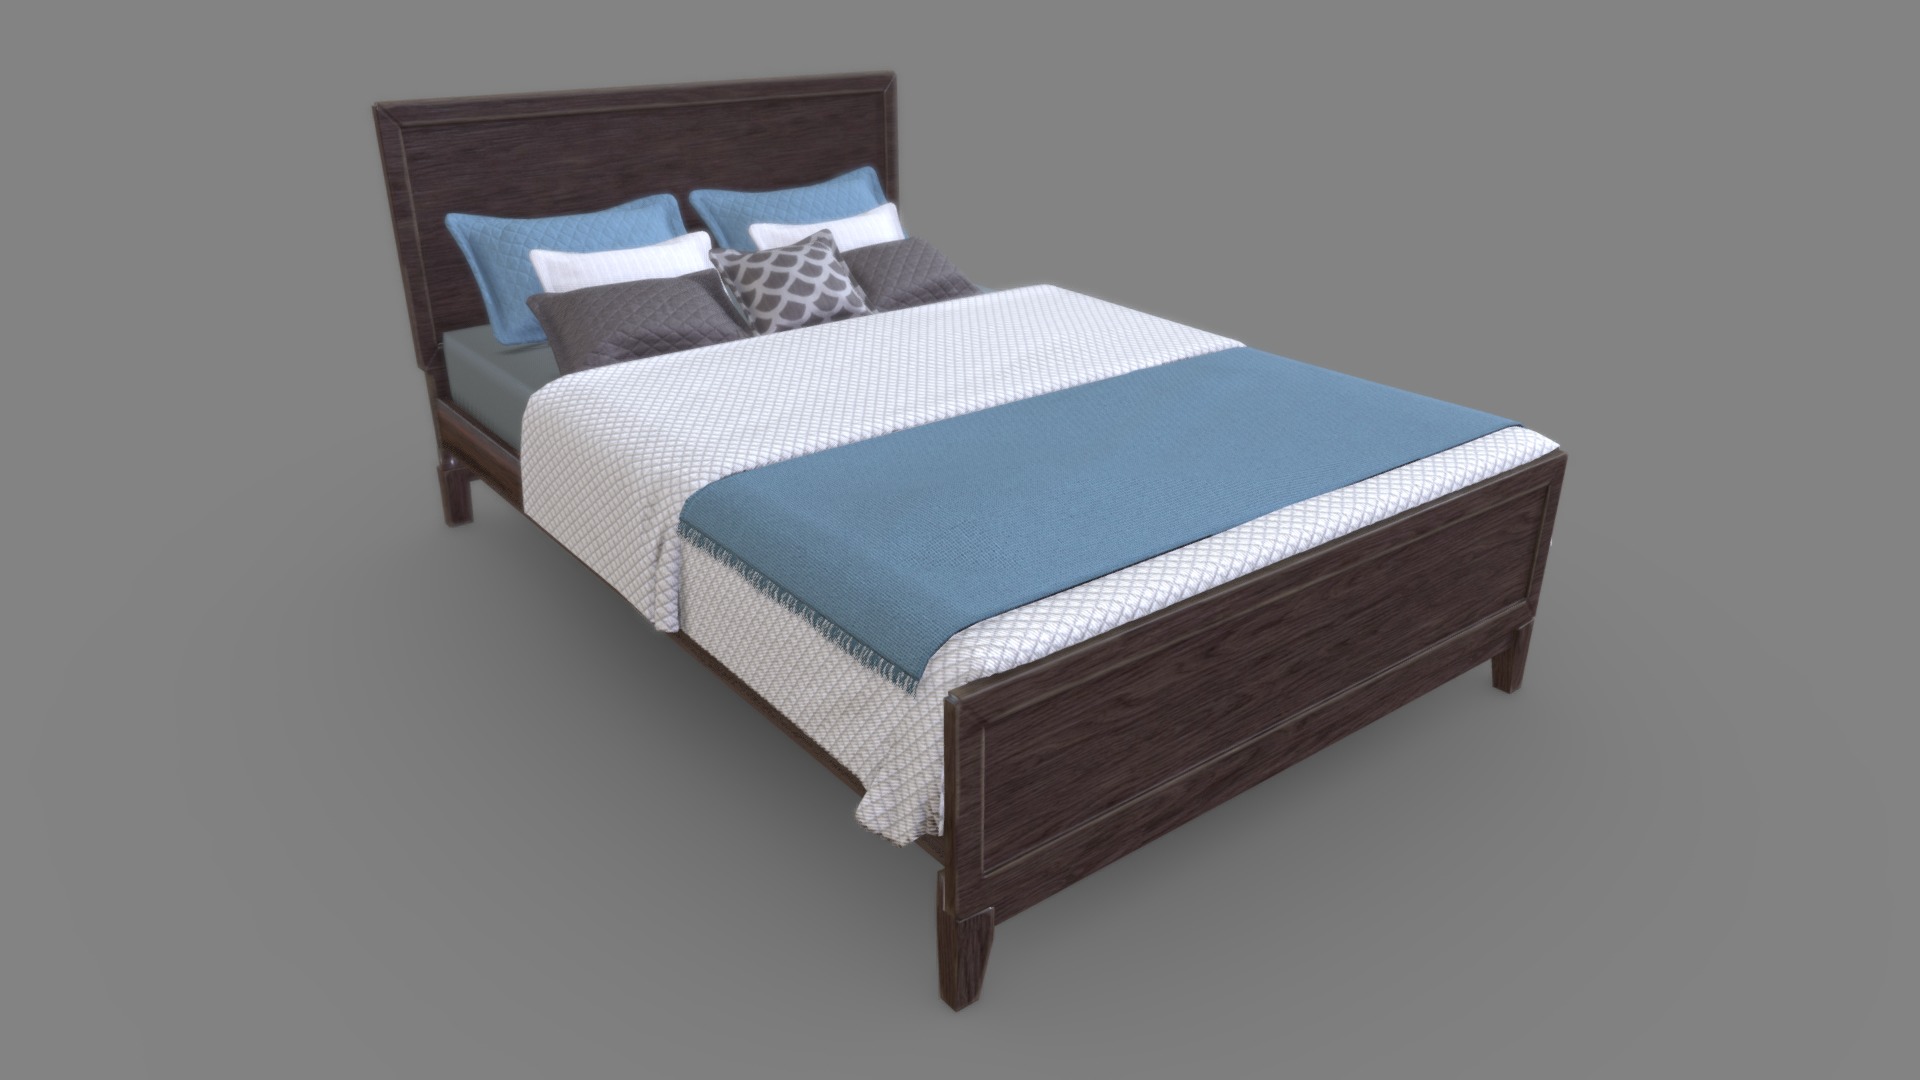 3D model Casual Bed - This is a 3D model of the Casual Bed. The 3D model is about a bed with a blue cover.